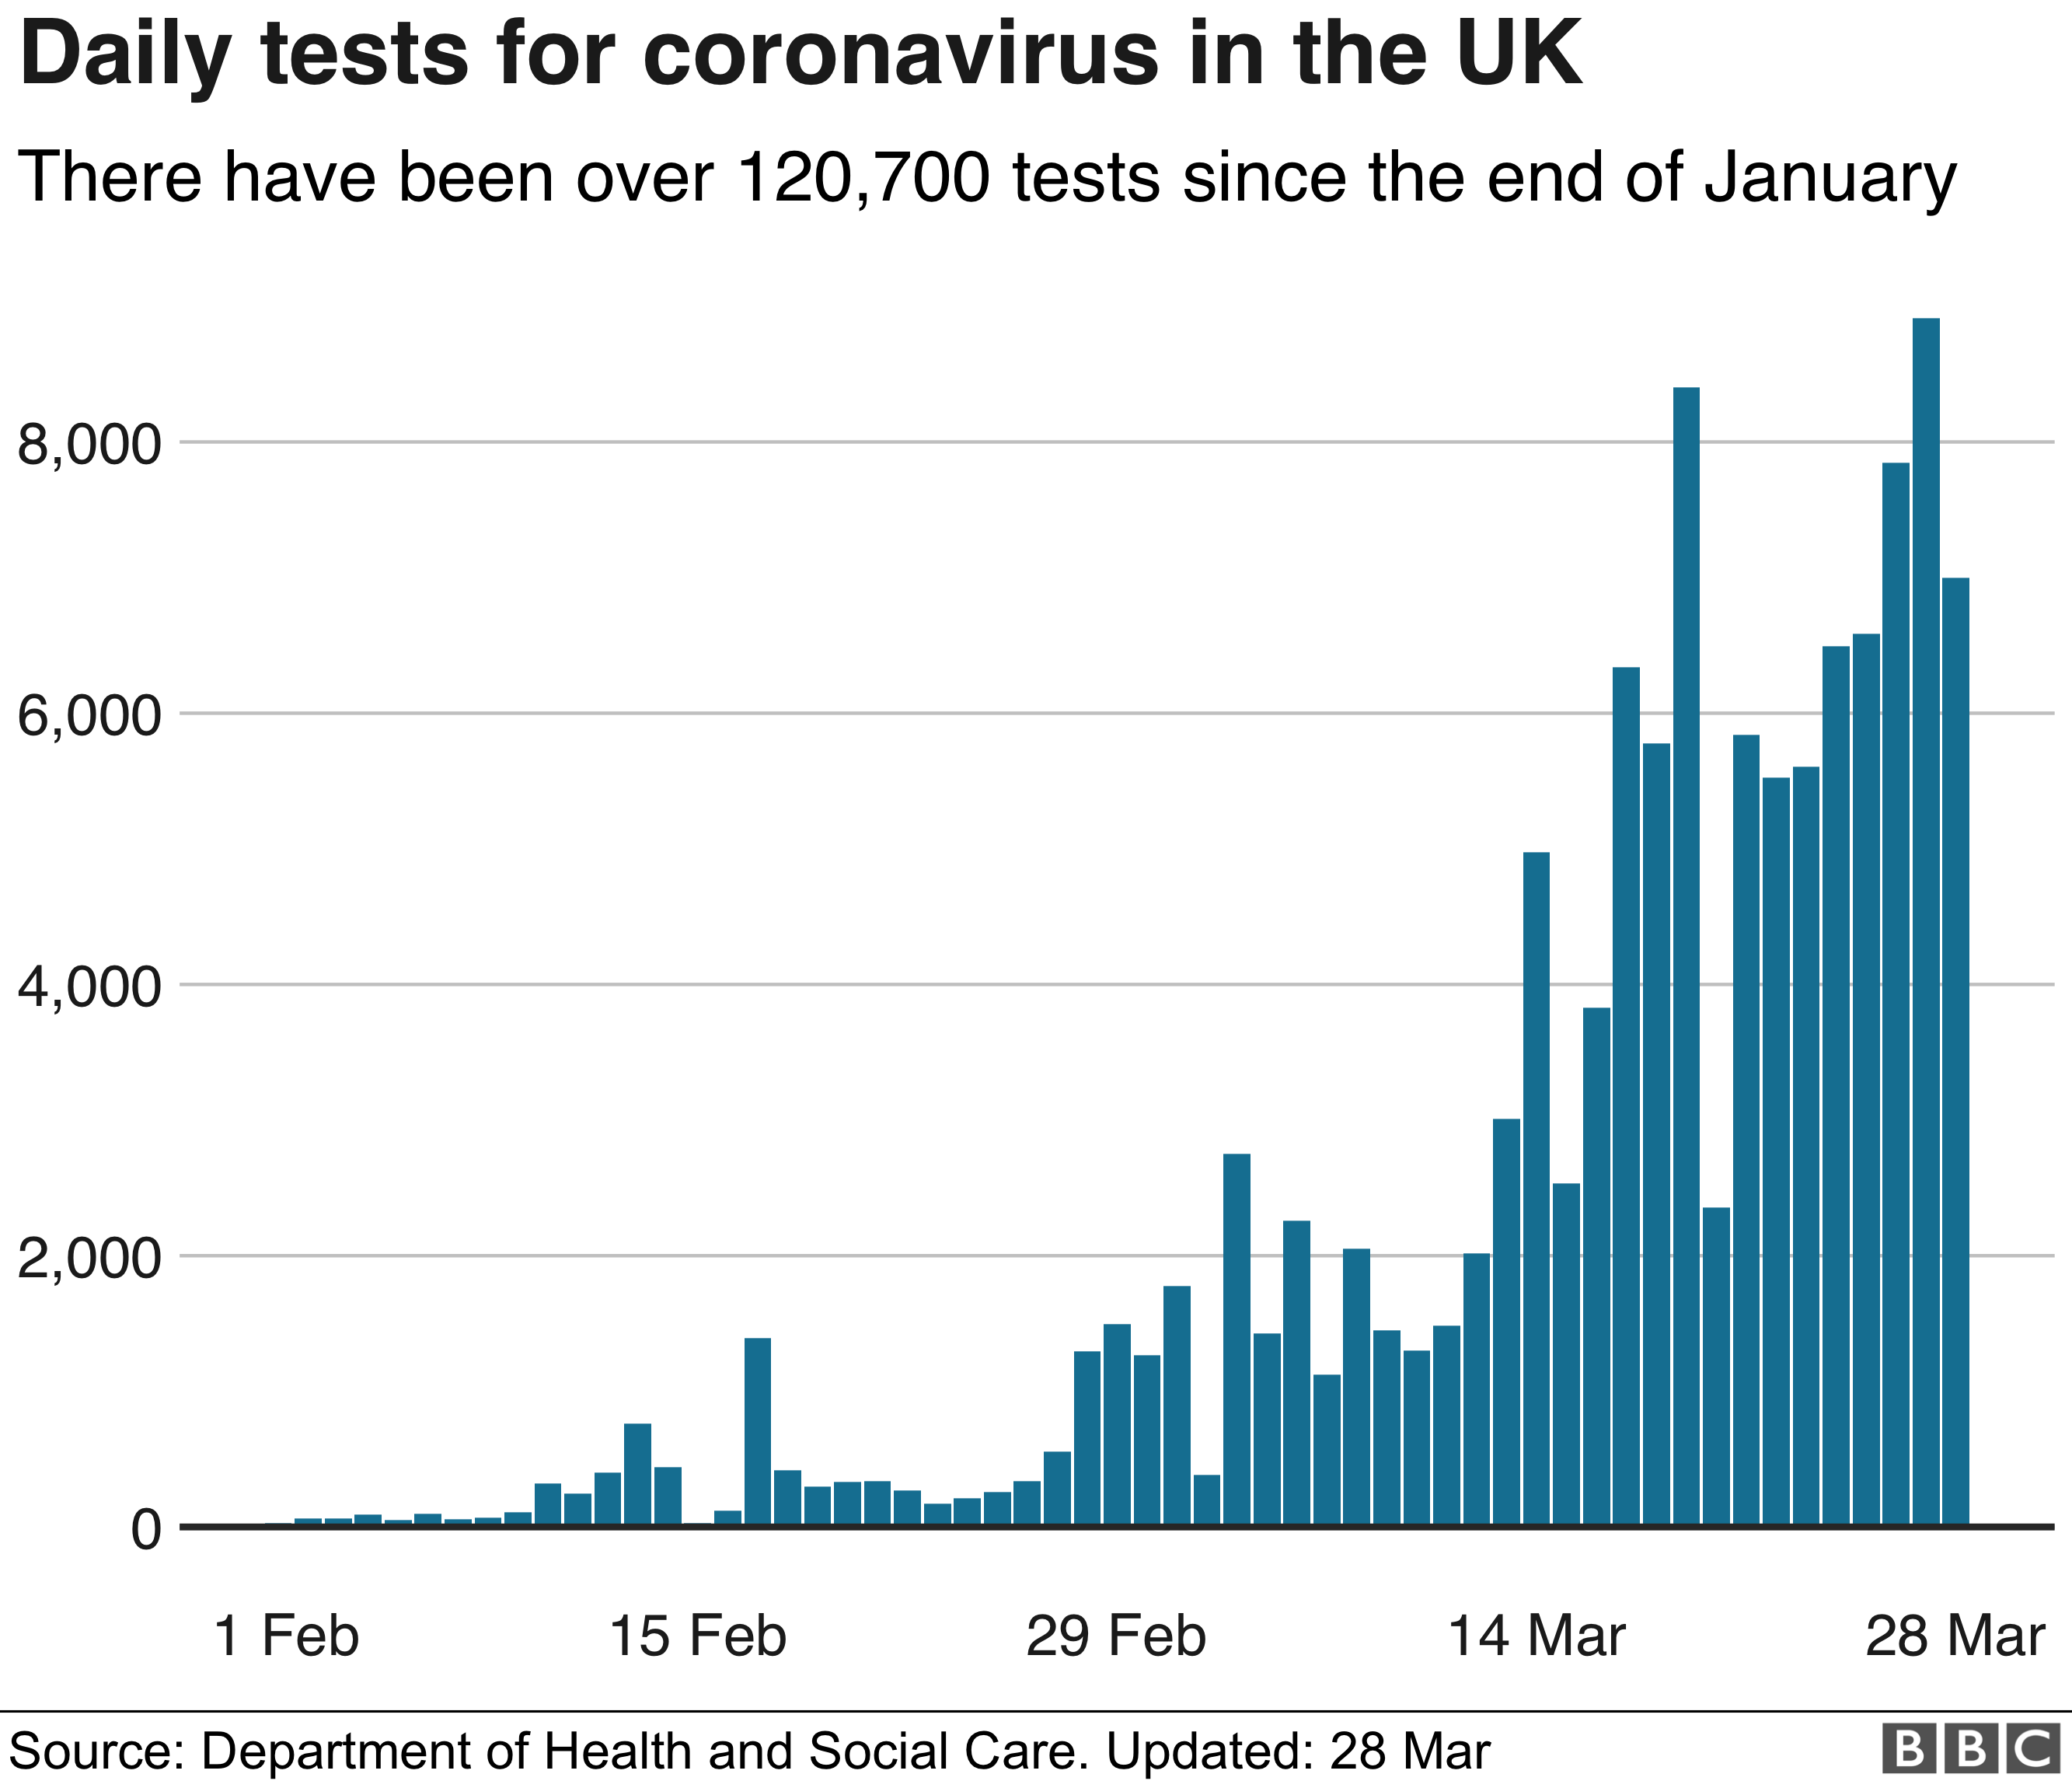 Daily tests for coronavirus in the UK - a bar chart